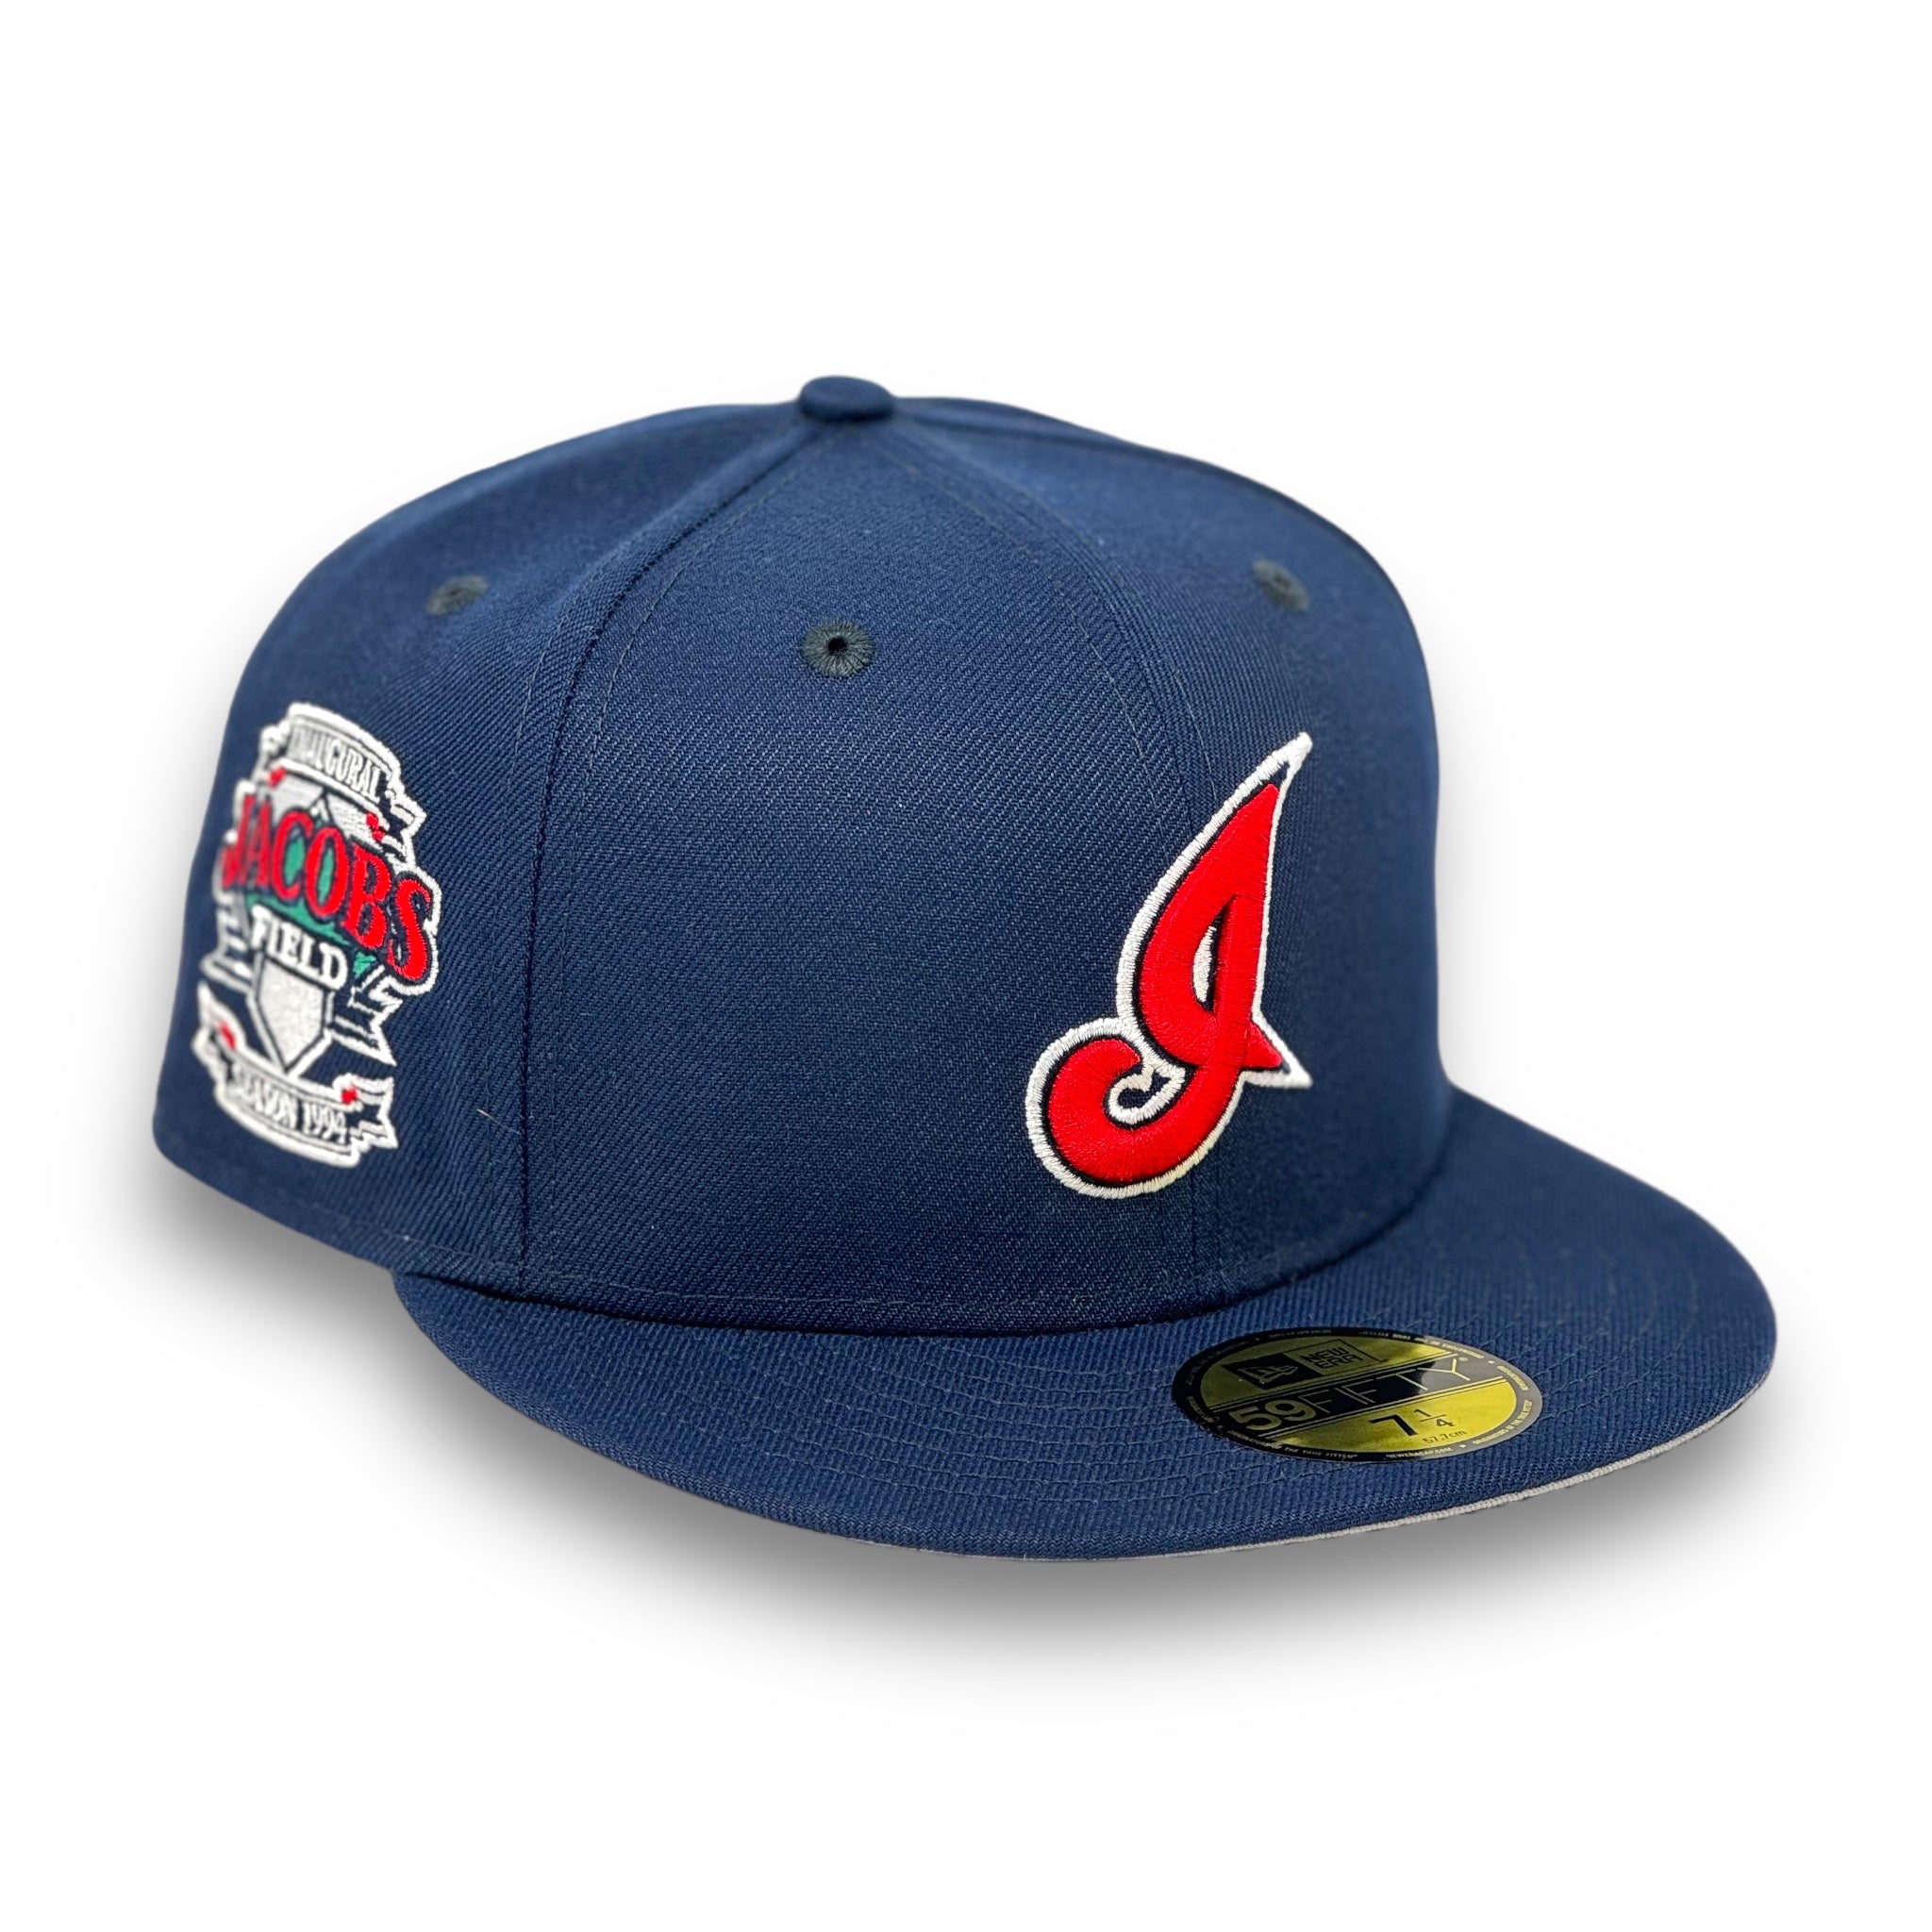 CLEVELAND INDIANS (NAVY/RED) (INAUGURAL SEASON 1994) NEW ERA 59FIFTY FITTED